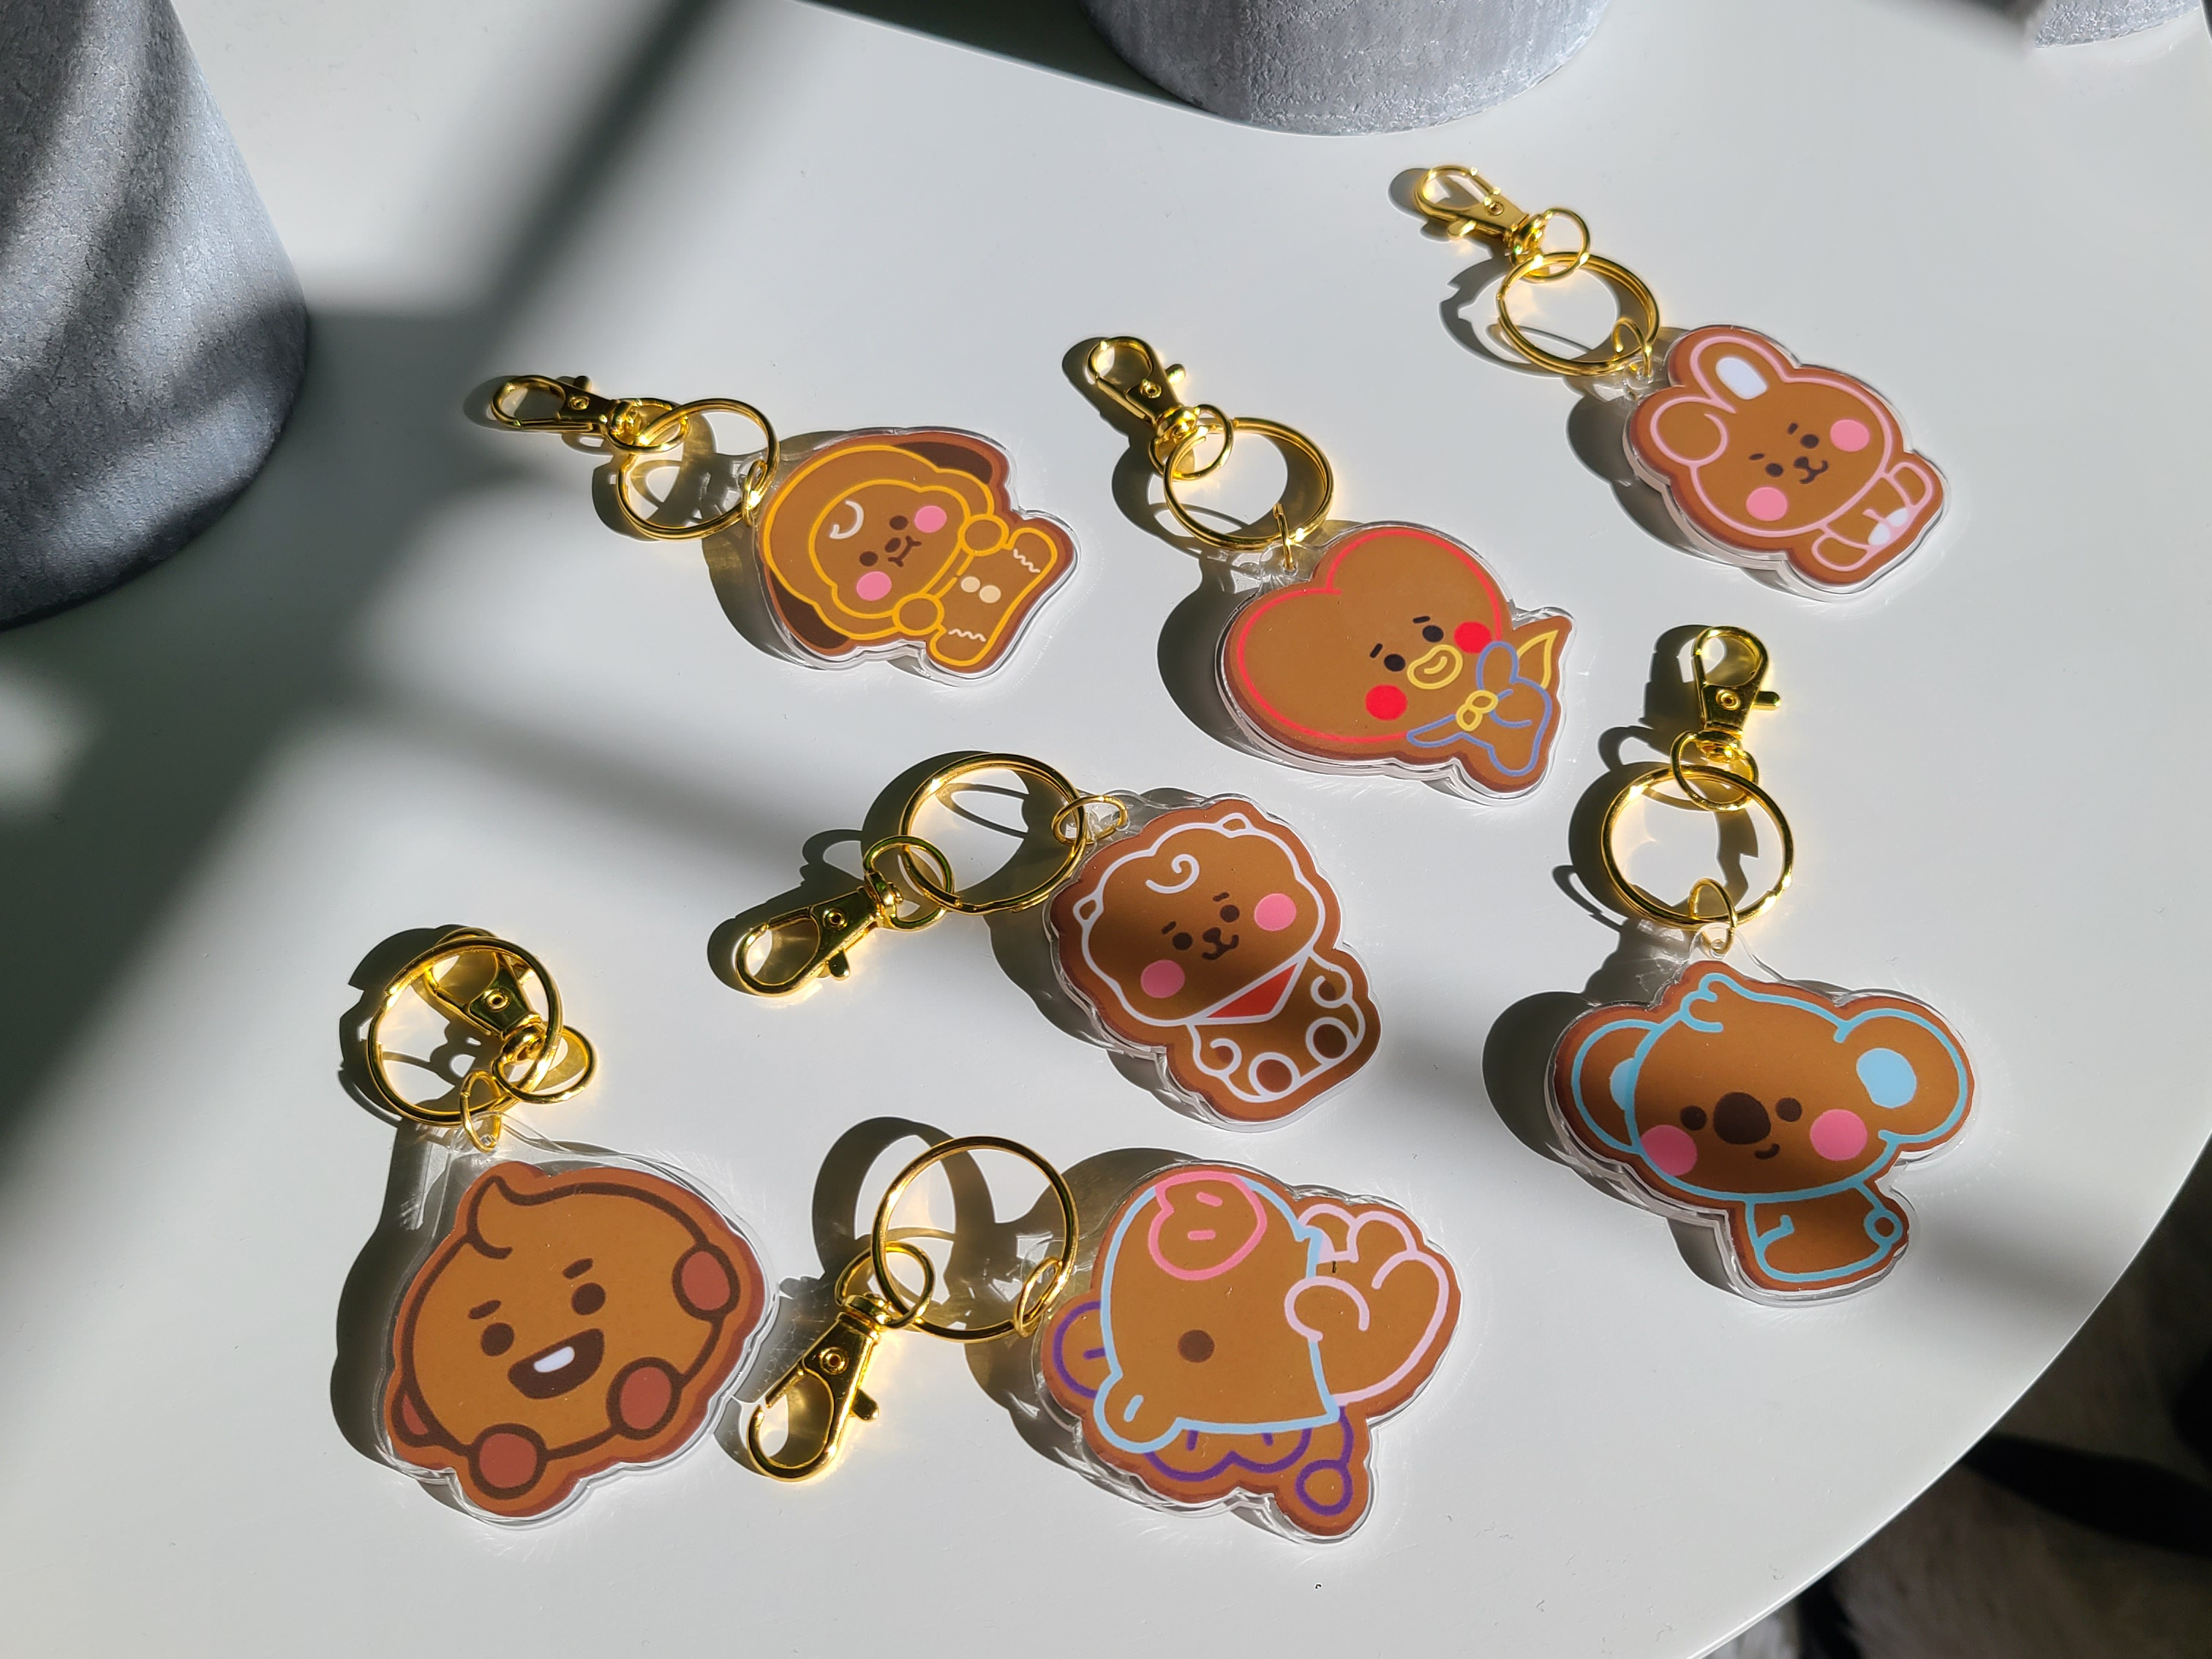 Mystery Box BTS Keychains and Pins!